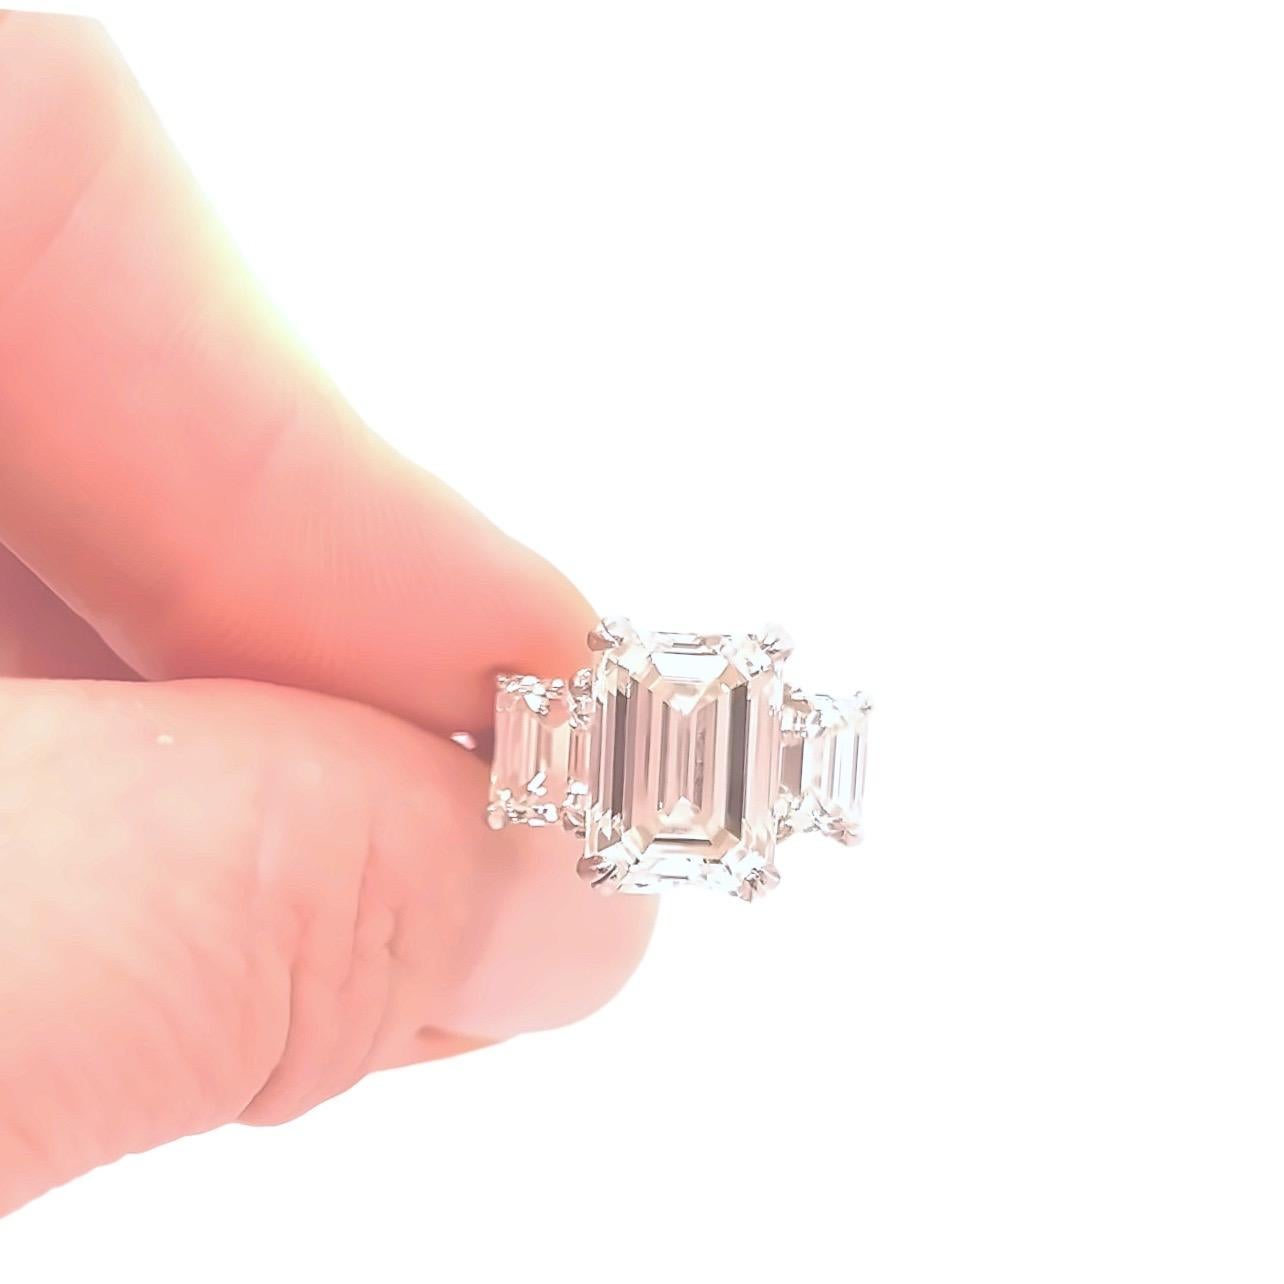 Classic 3 stone engagement ring featuring a 5.01ct Emerald cut Diamond with GIA certificate accented by two additional emerald cut side stones each weighing almost 1ct each all set in platinum. The center stone is accompanied by a GIA Report and the